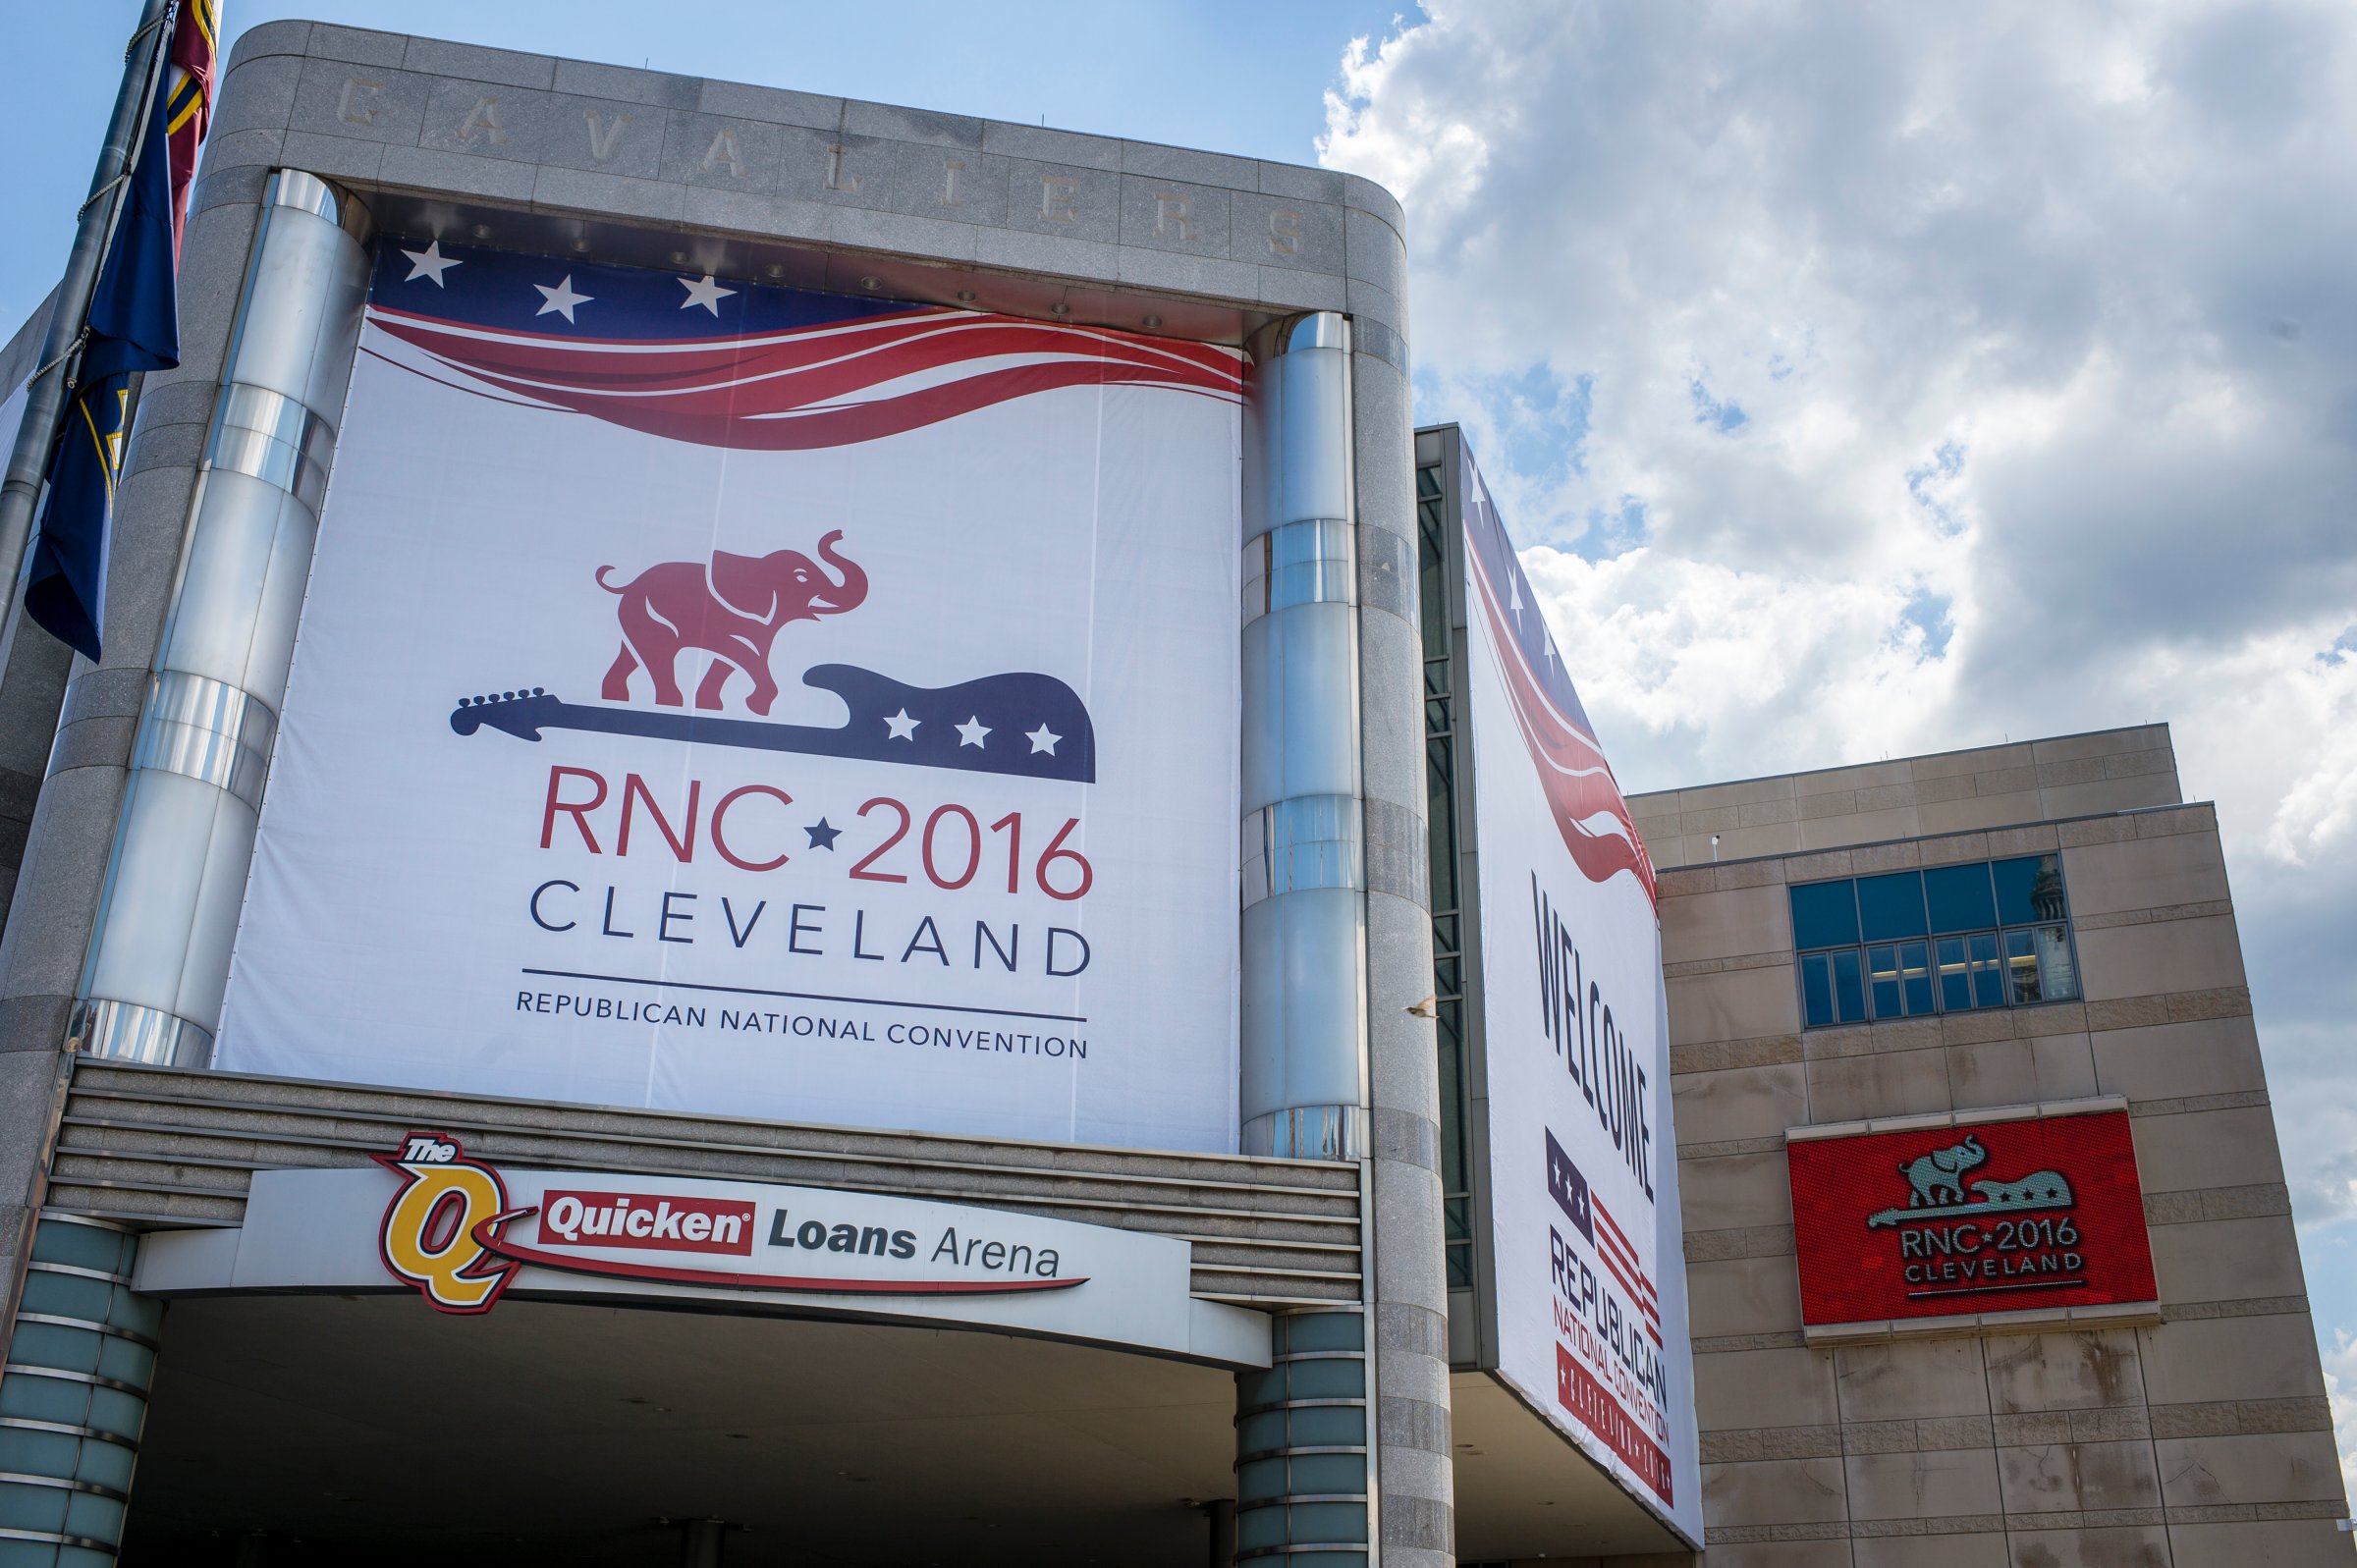 Quicken Loans Arena is decorated to welcome the Republican National Convention on July 11, 2016 in Cleveland, Ohio.